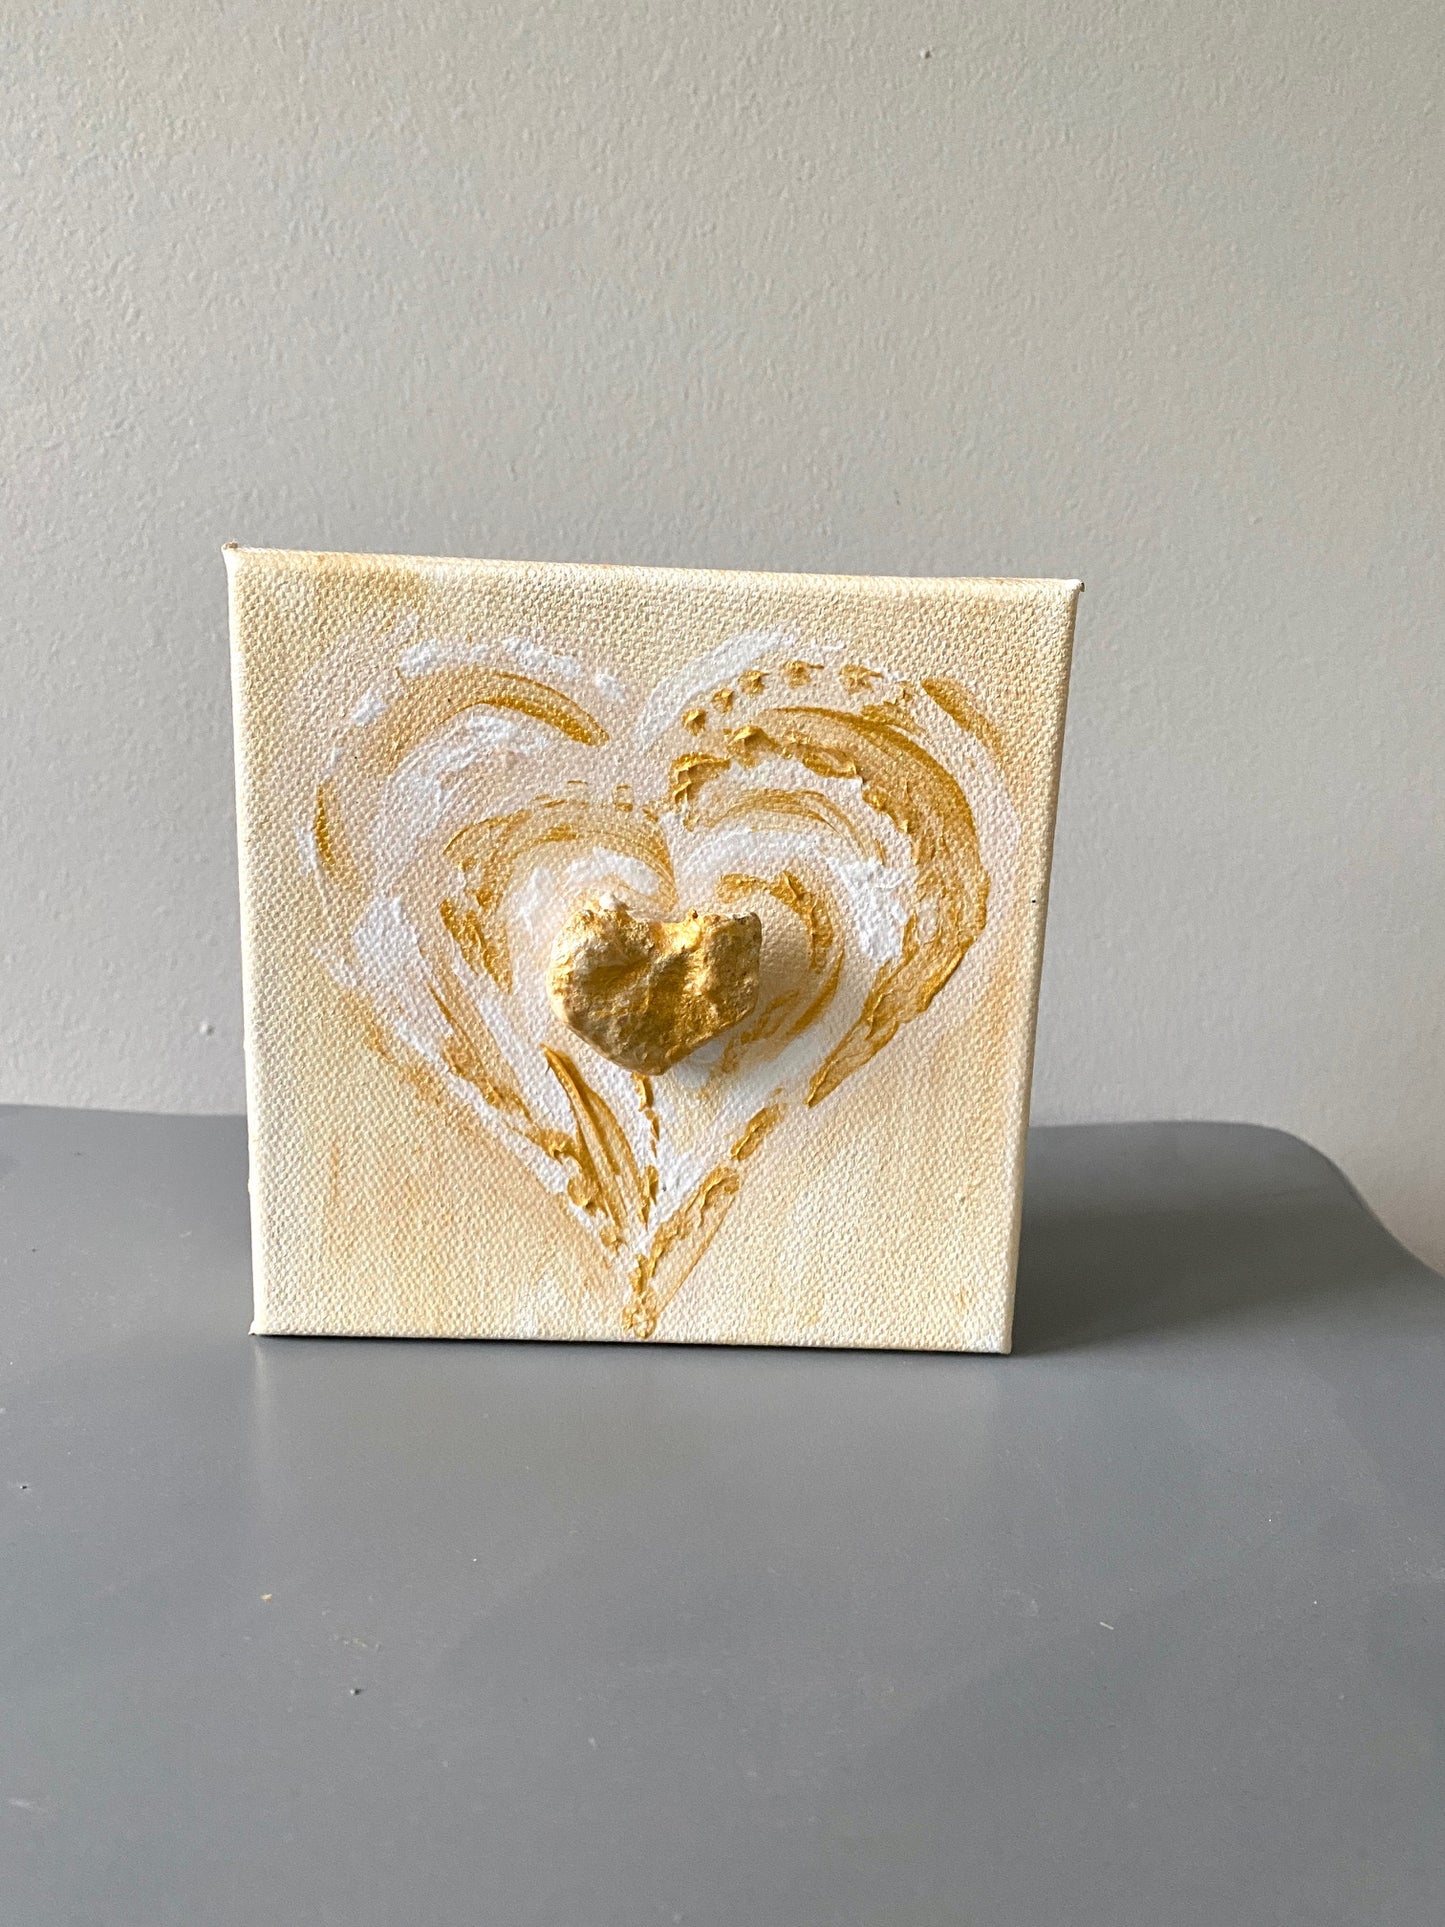 Painted Yellow/Gold Heart Painting #111